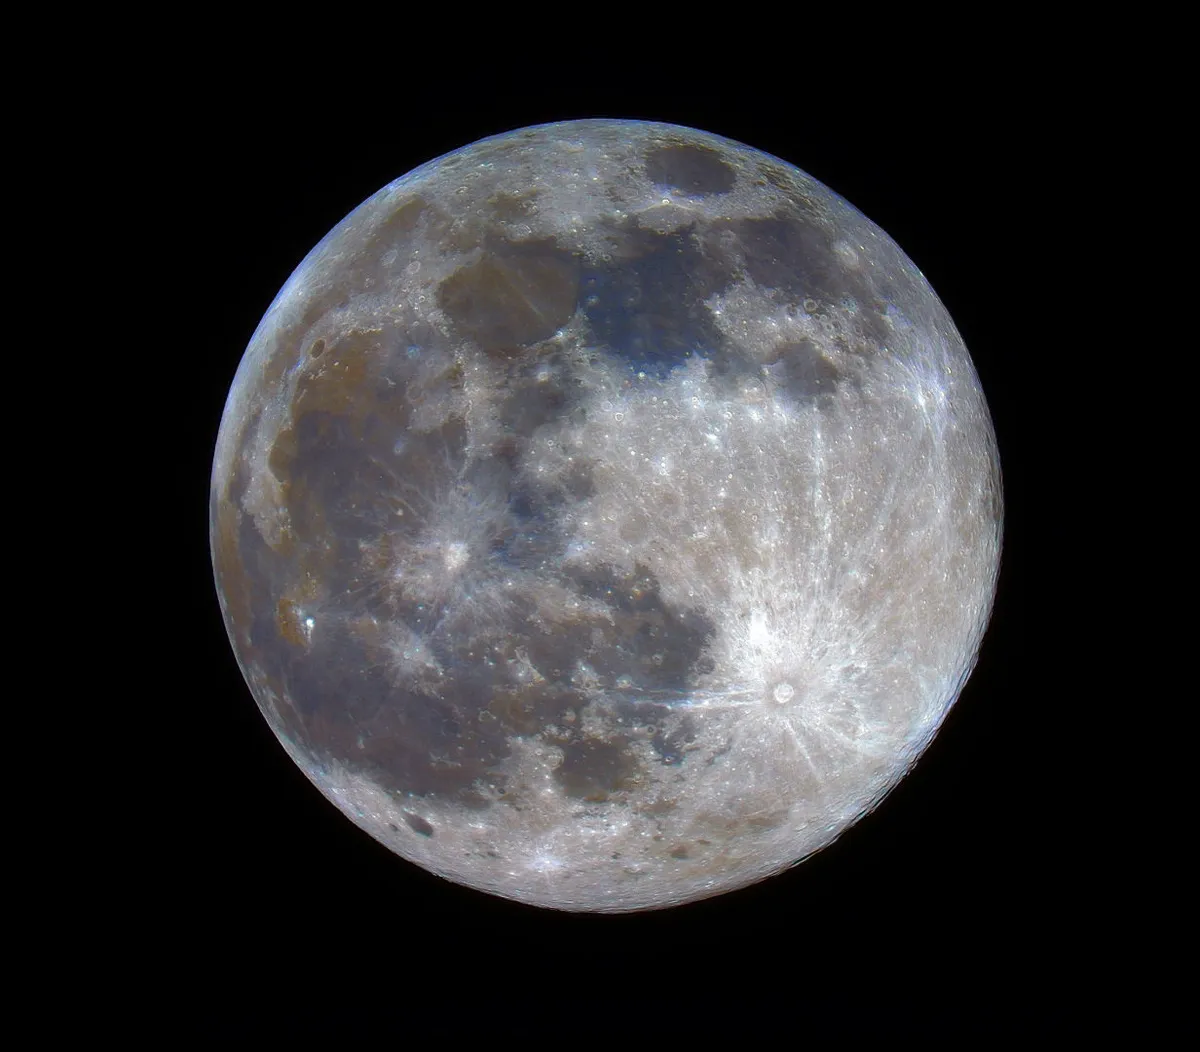 Mineral Wolf Moon by Dan Fleetwood, Rugby, 17 January 2022. Equipment: Canon 250D DSLR, Celestron NexStar 8SE